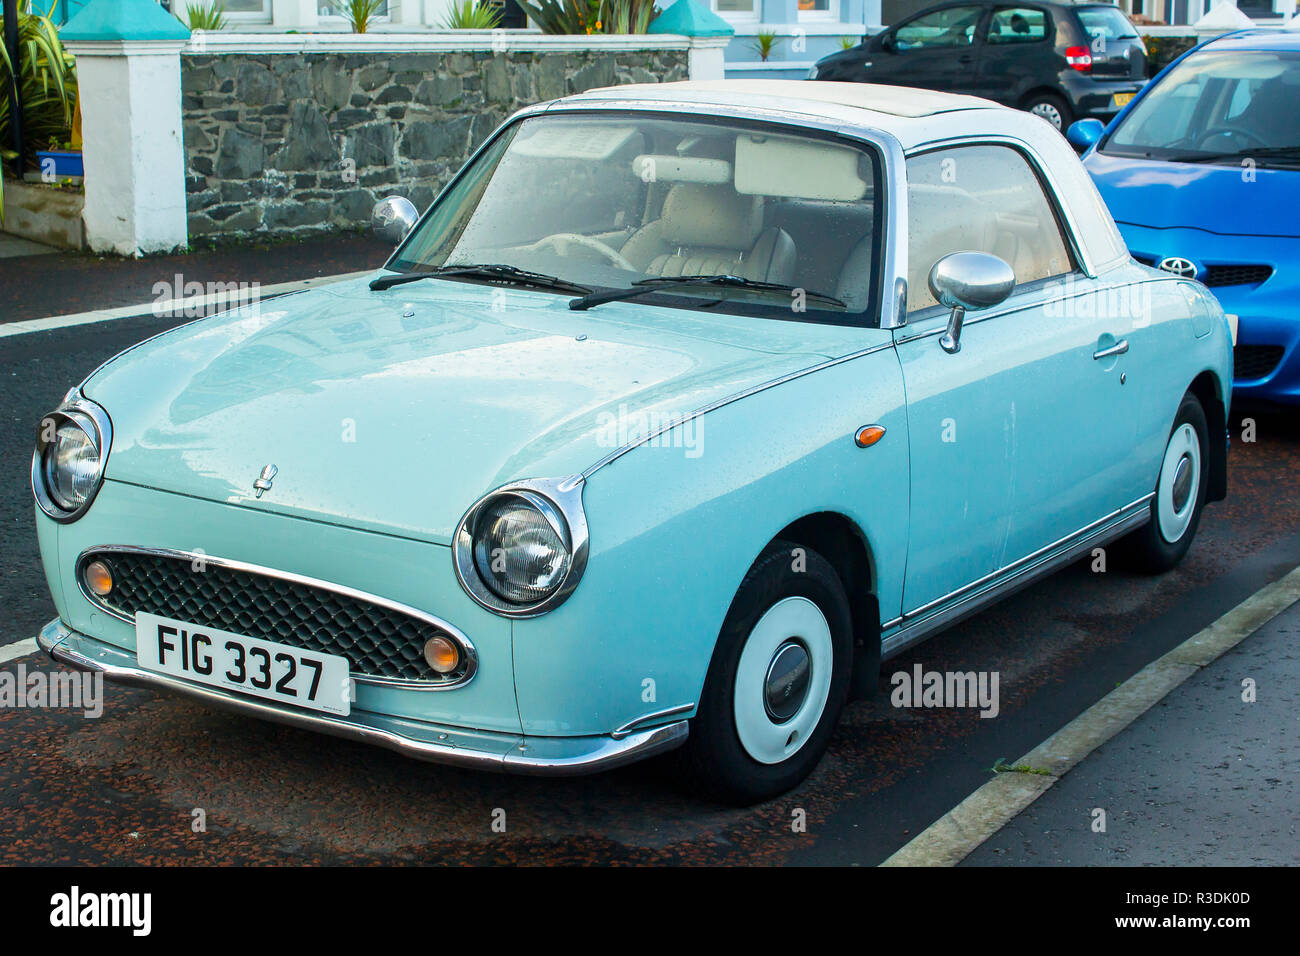 11 October 2018 A Classis Nissan Figaro automatic convertible car with mint chrome trim parked on the Seacliff Road in Bangor County Down Northern Ire Stock Photo